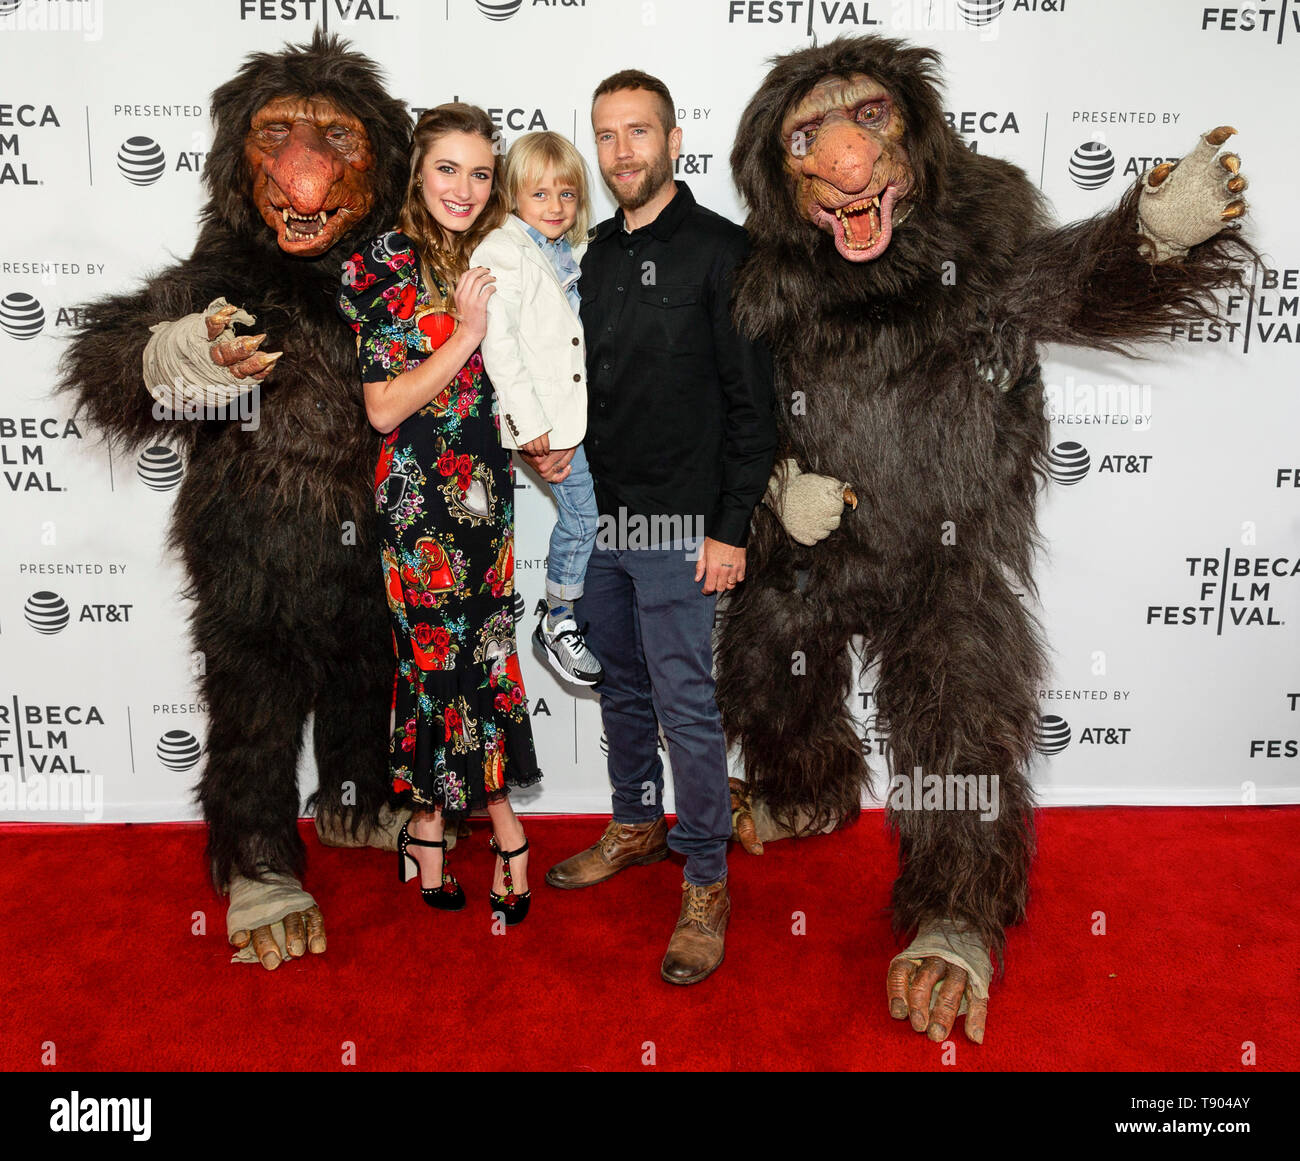 New York, NY - April 27, 2019: Grumblers Boomer and Morse, Bodhi Palmer, Mark Webber and Nicole Elizabeth Berger attend the premiere of the 'The Place Stock Photo